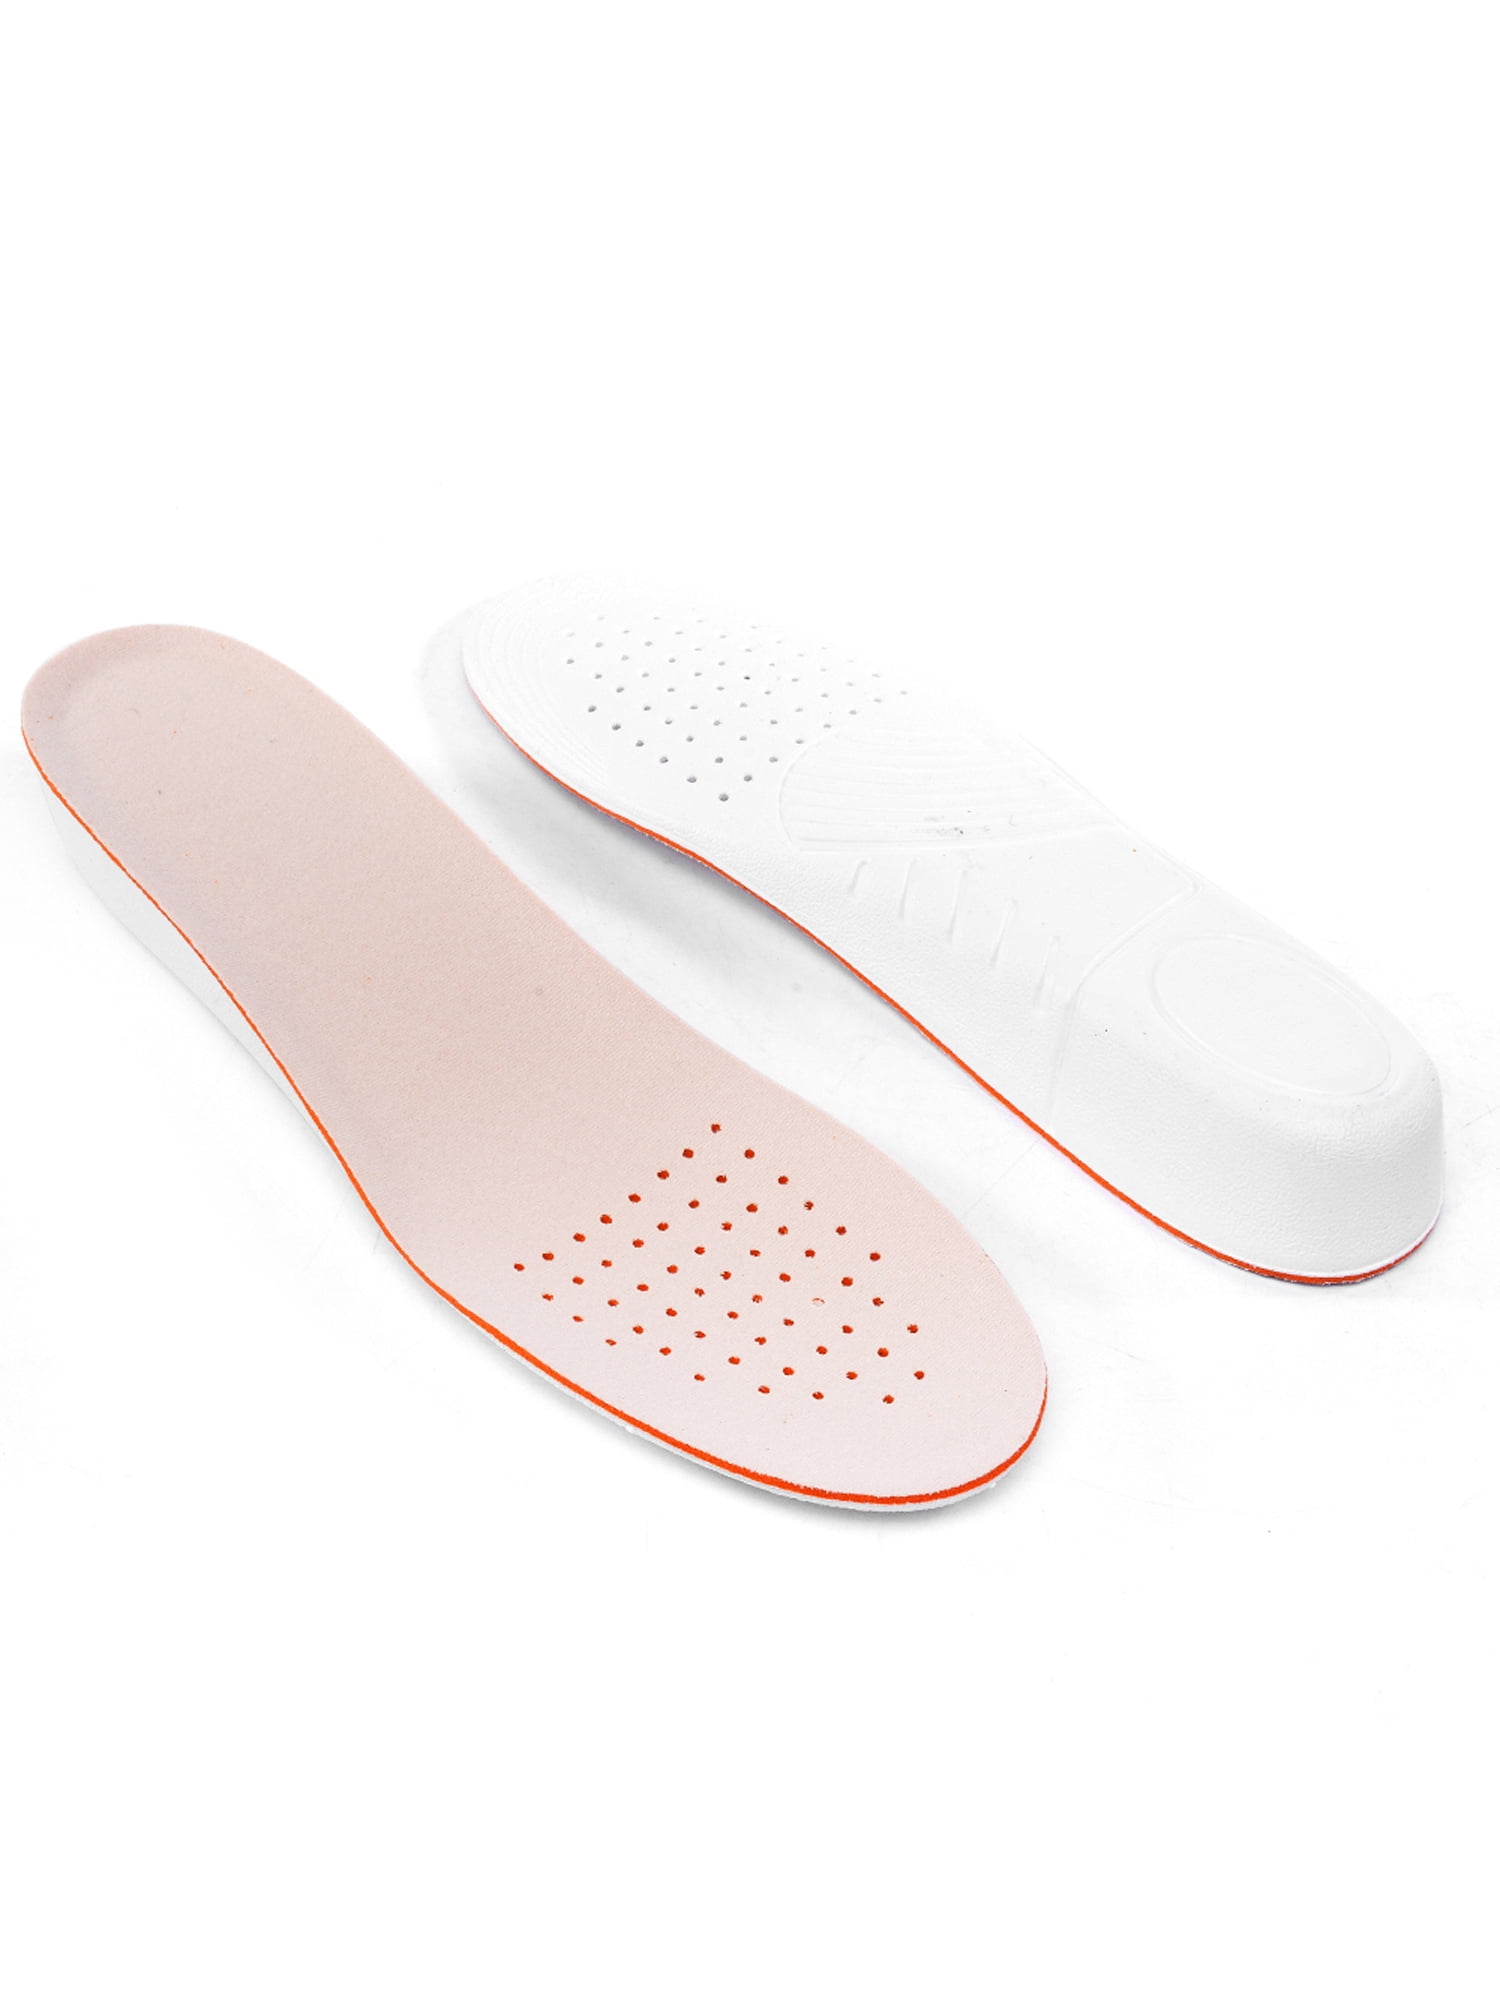 HEIGHT INCREASE SHOES INSOLE | ClickBD